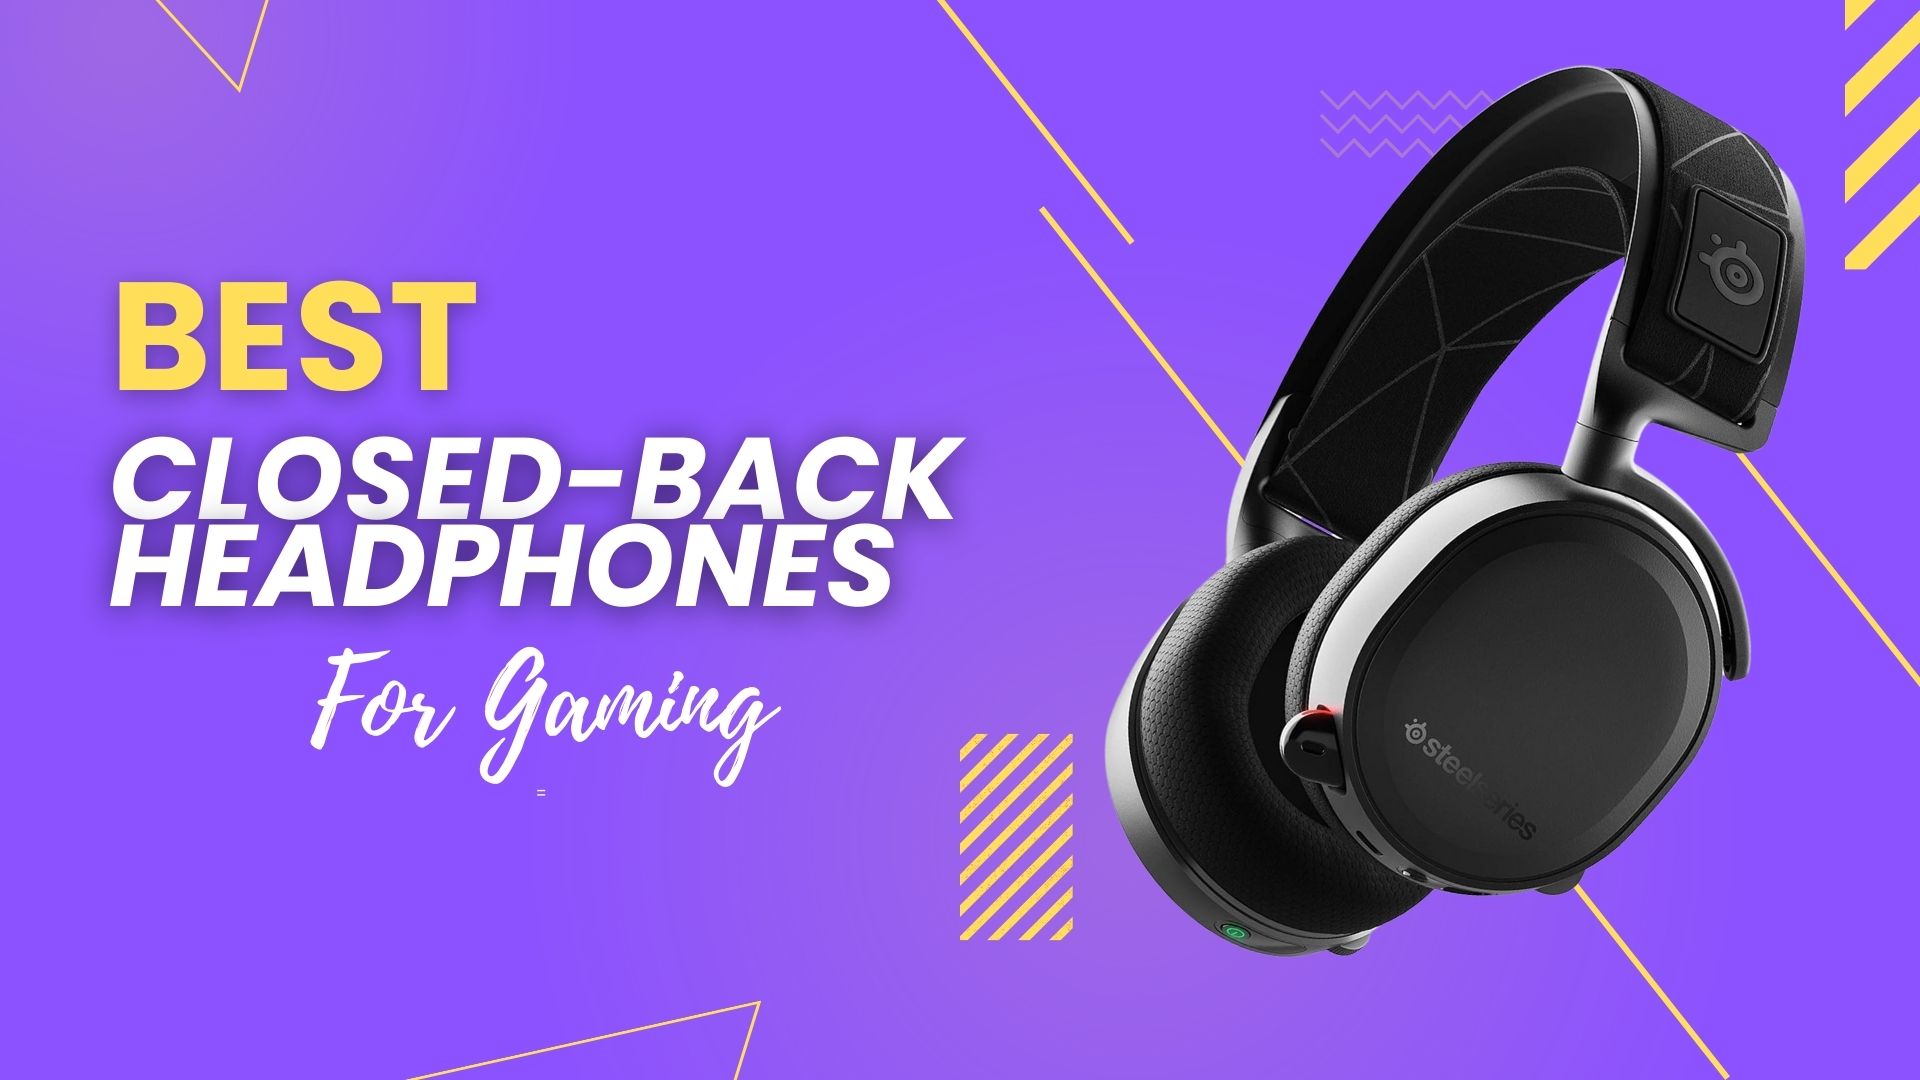 5 Best Closed-Back Headphones for Gaming